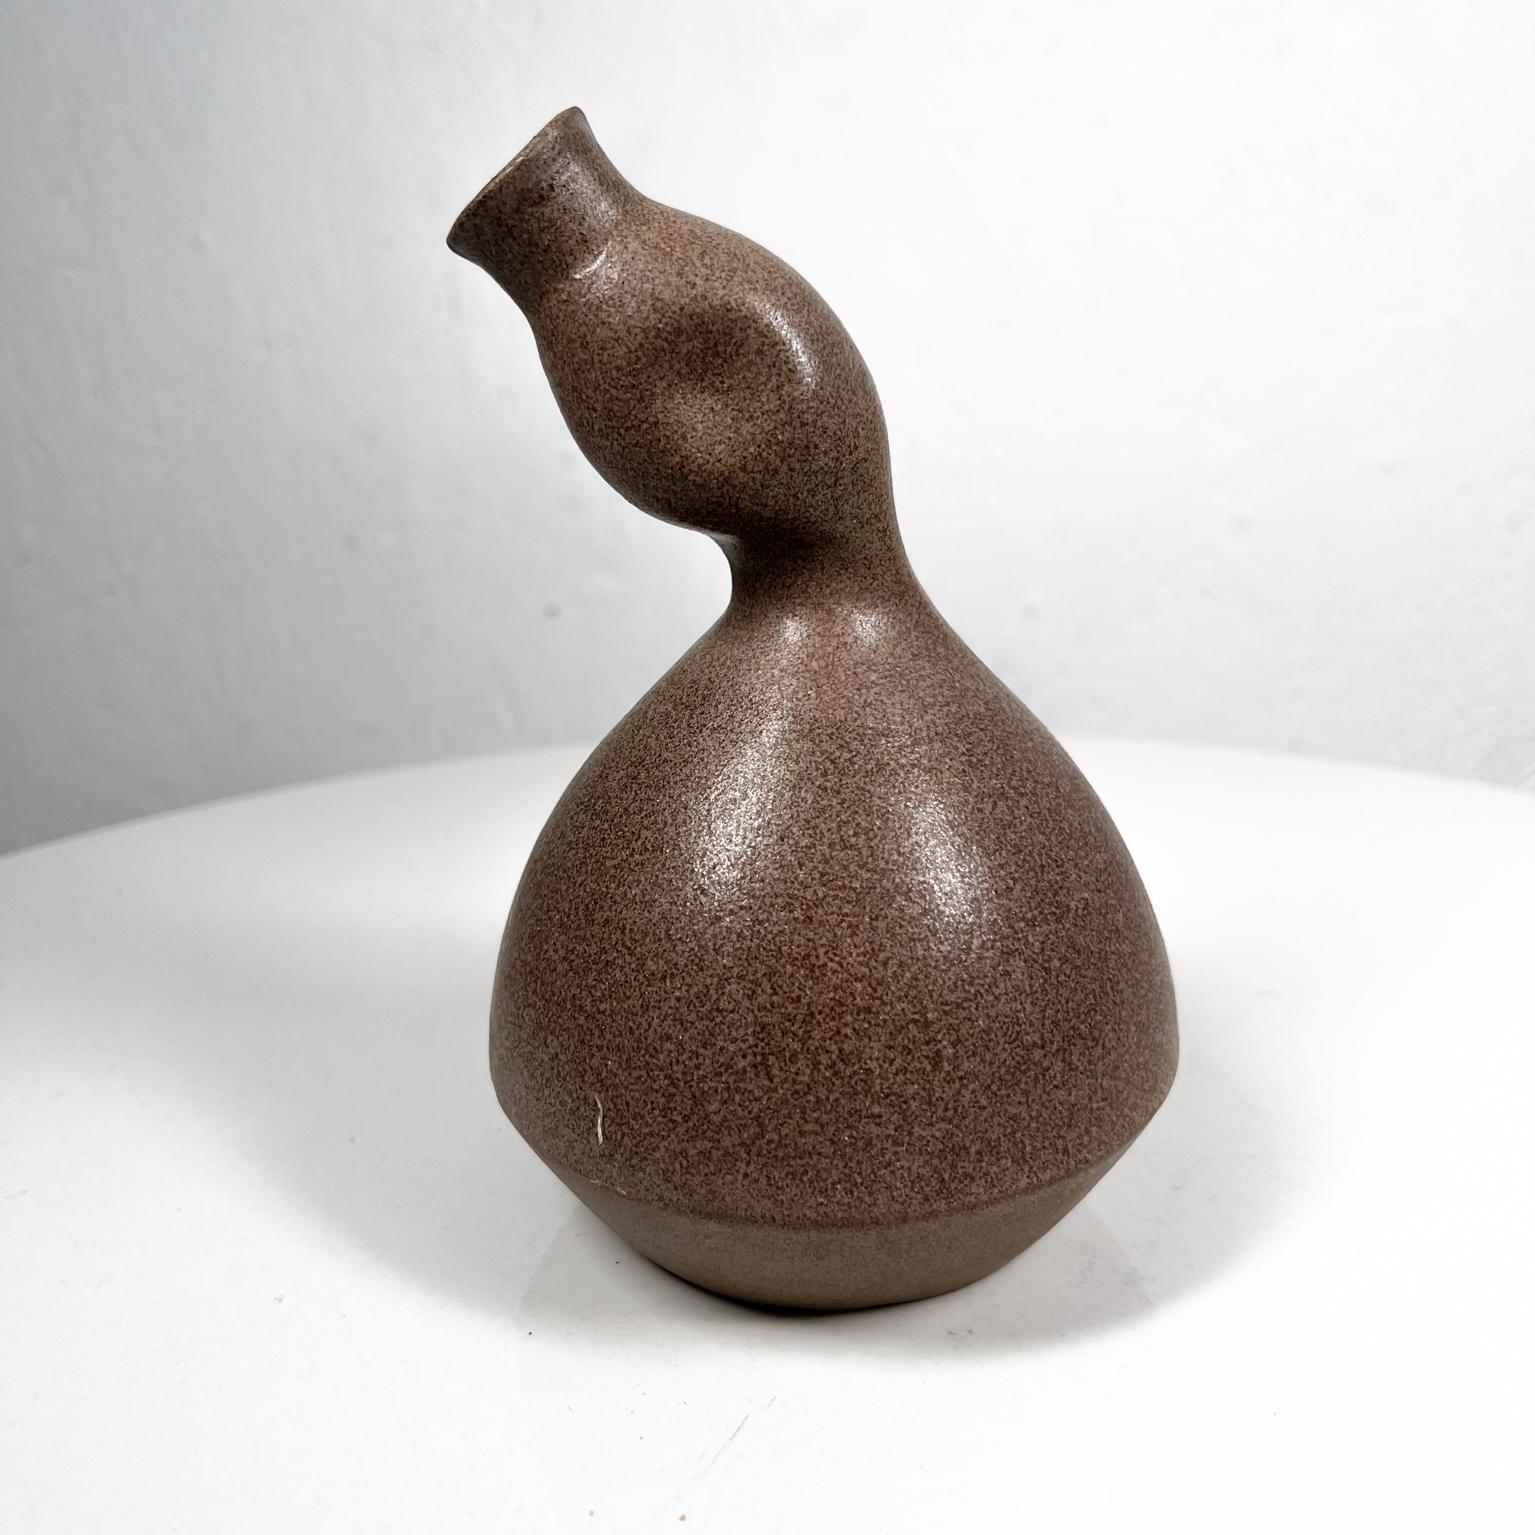 1970s Art Pottery Anderson Abstract Vase Smooth Sensual Duck Shape
6.75 h x d 4
Original preowned vintage condition.
Refer to images provided.

